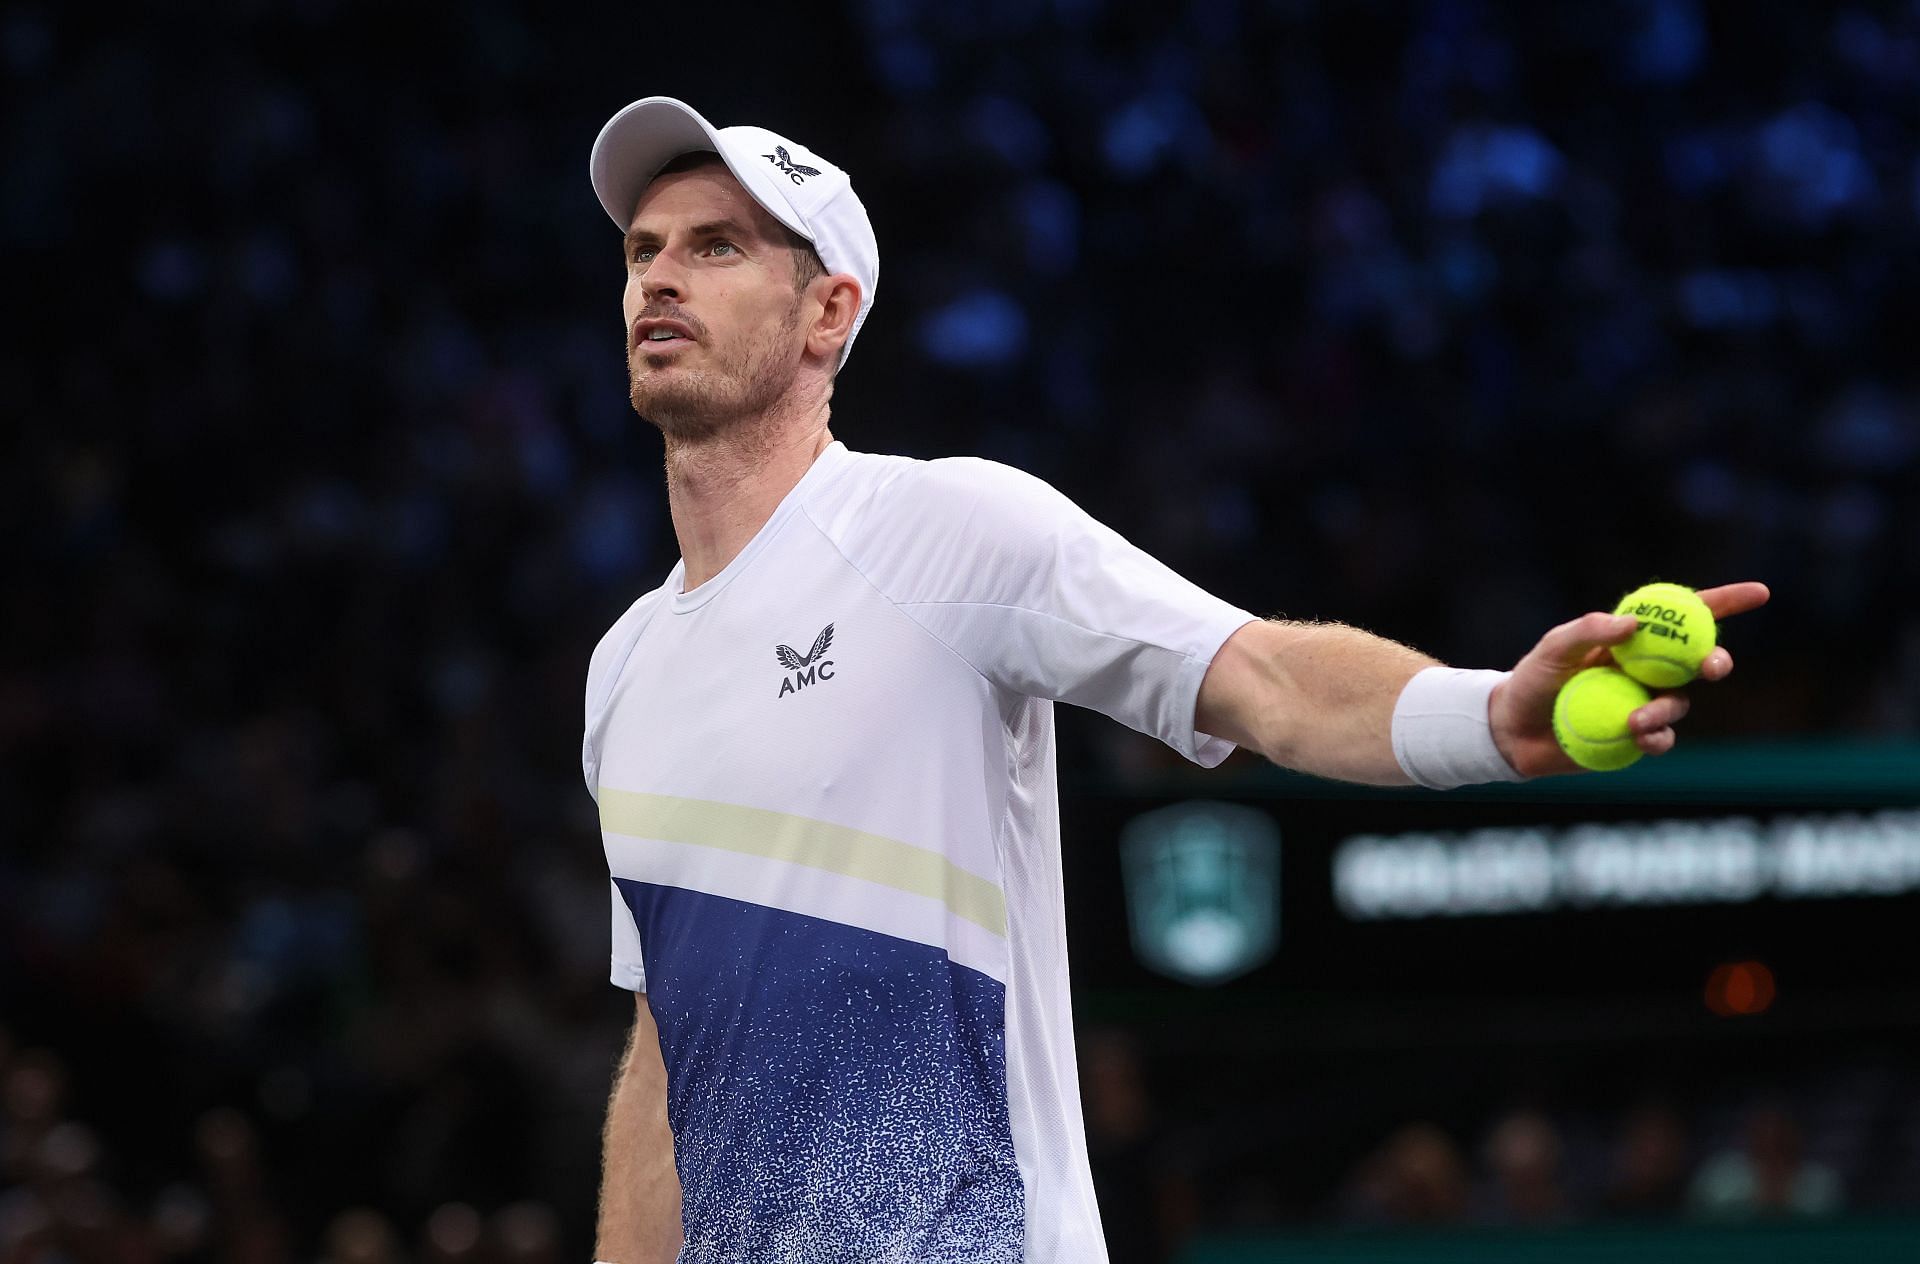 Murray withdrew from his last tournament.